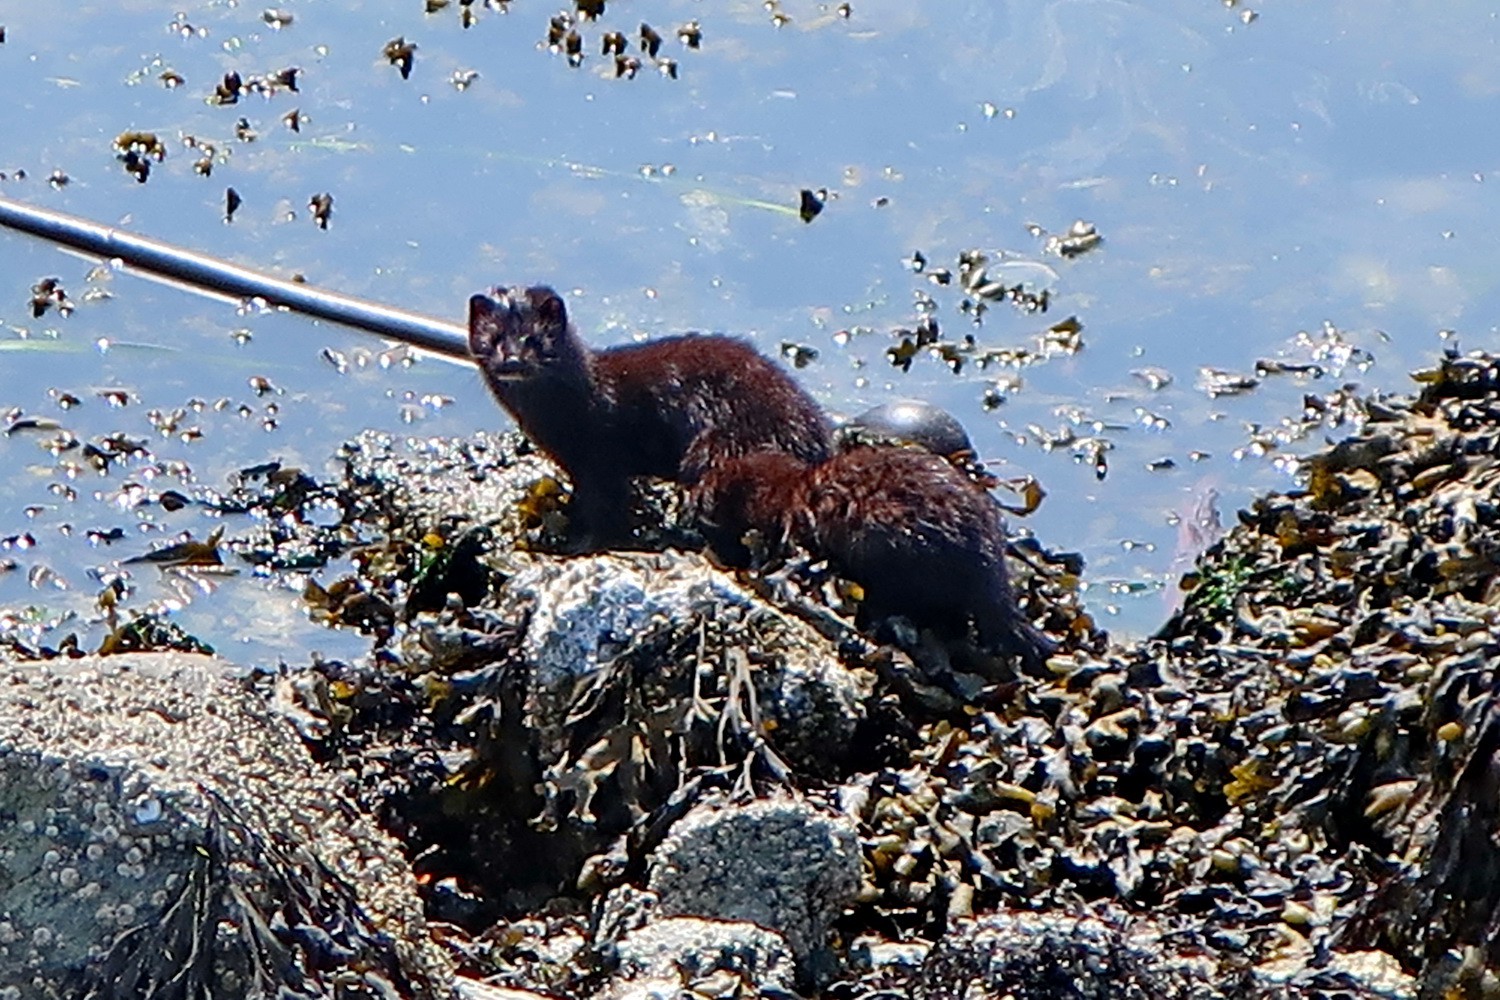 Otters in the port of Victoria